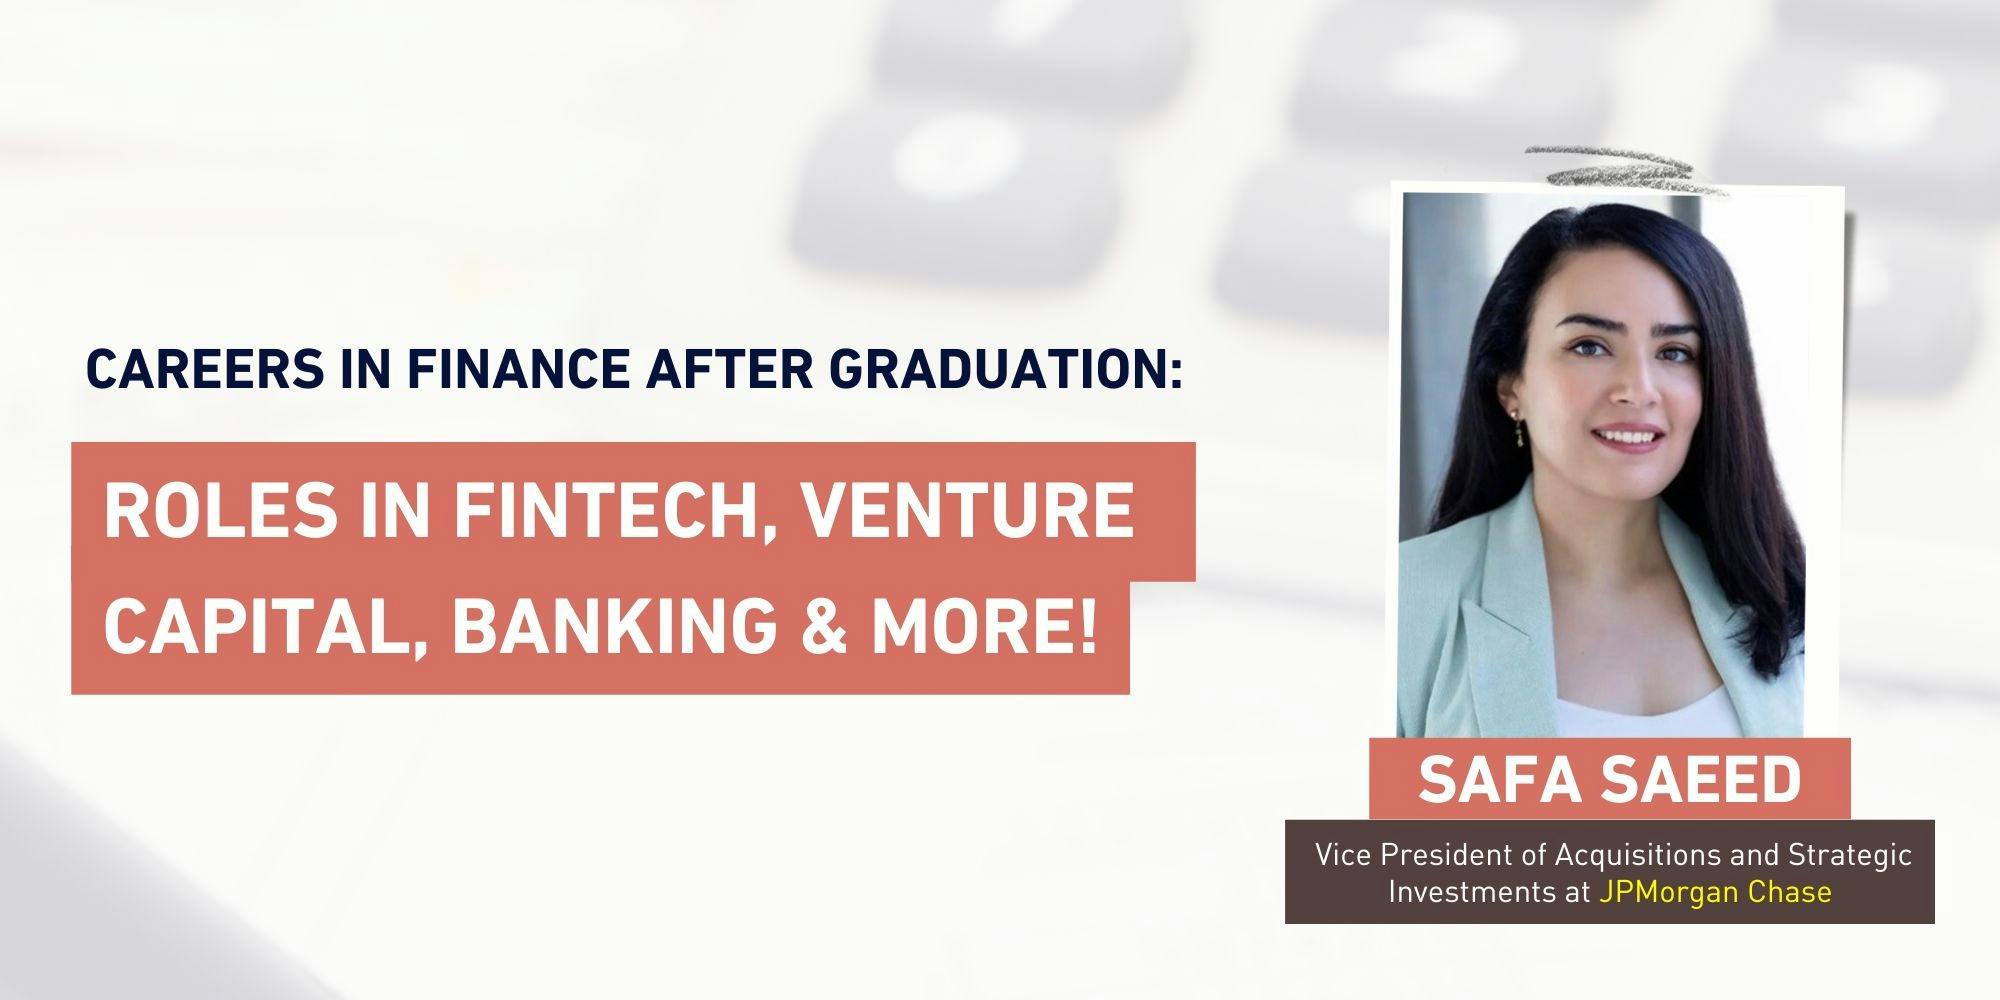 Careers In Finance After Graduation: Roles In Fintech, Venture Capital, Banking and More!